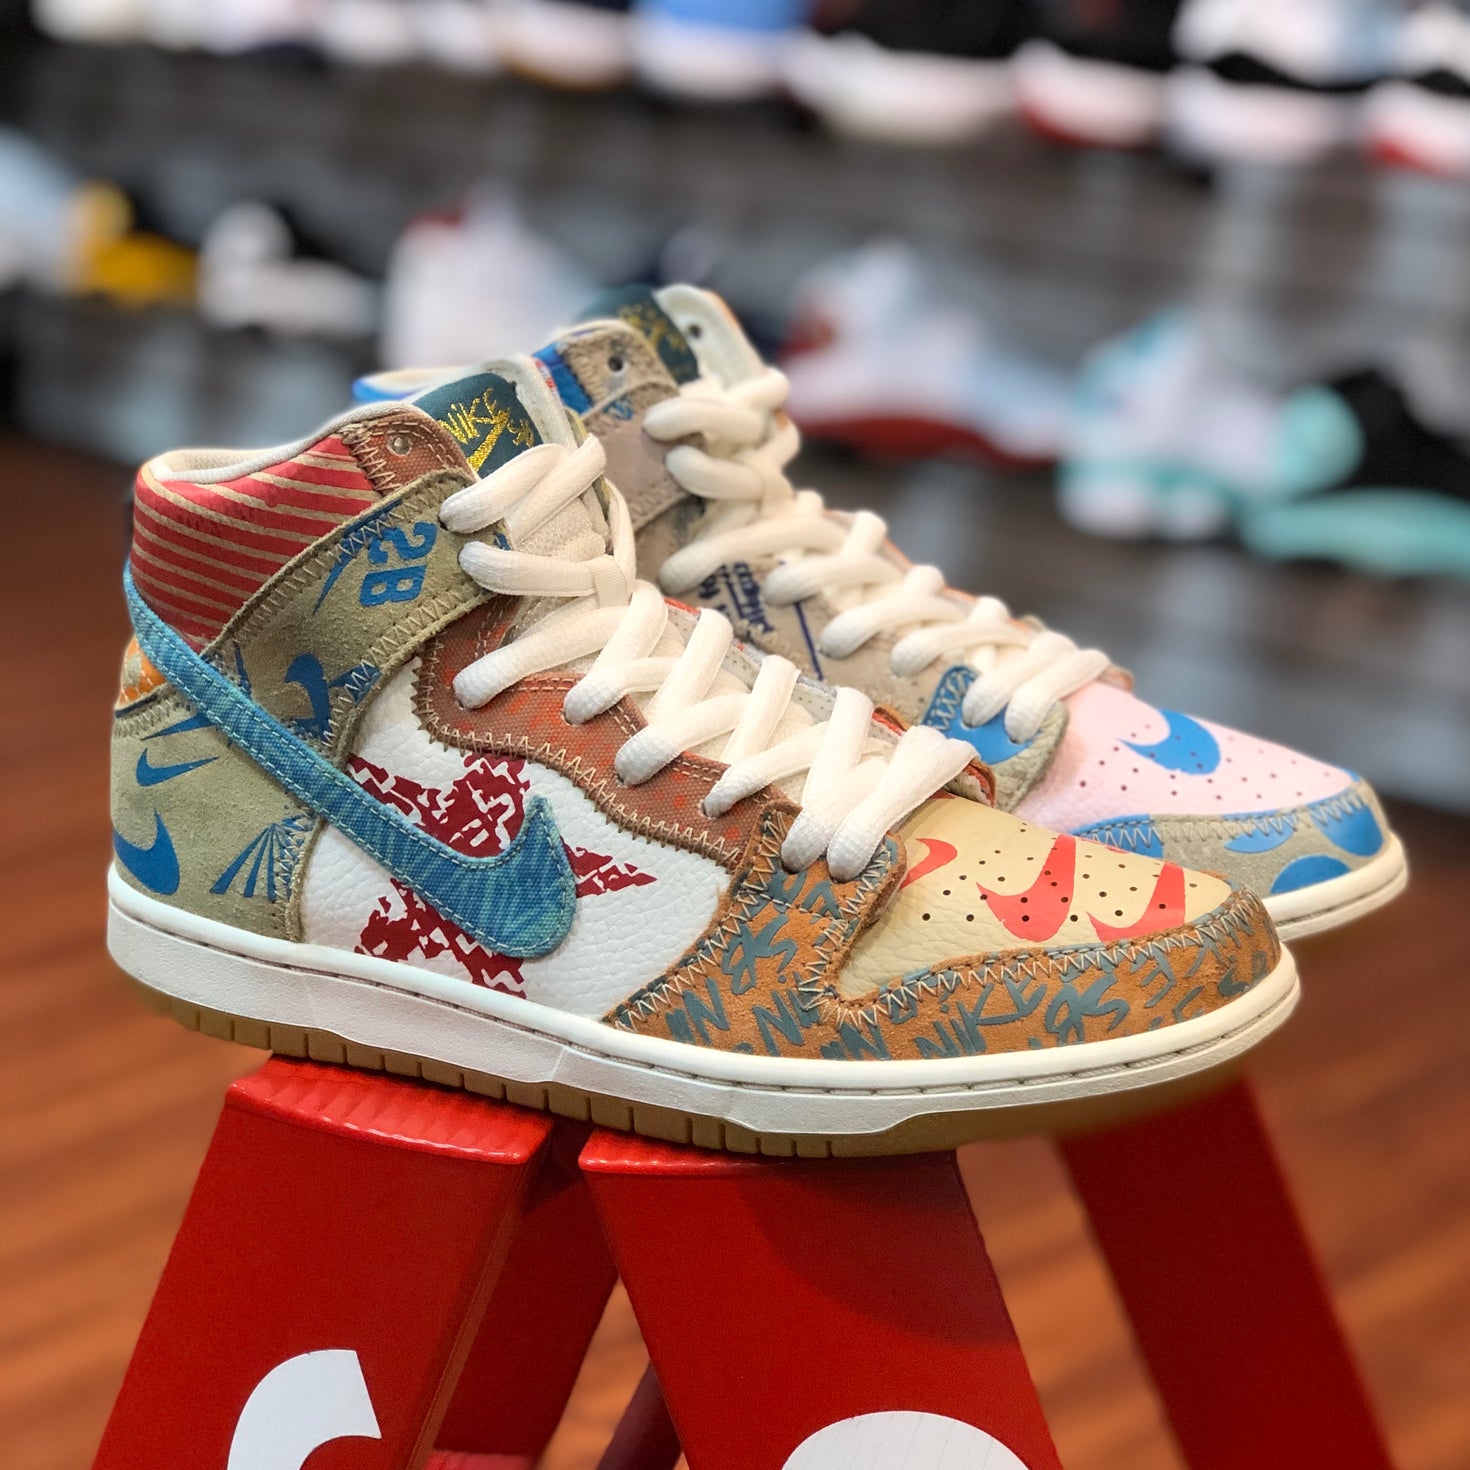 Nike SB Zoom Dunk High “Thomas Campbell What The” | Request